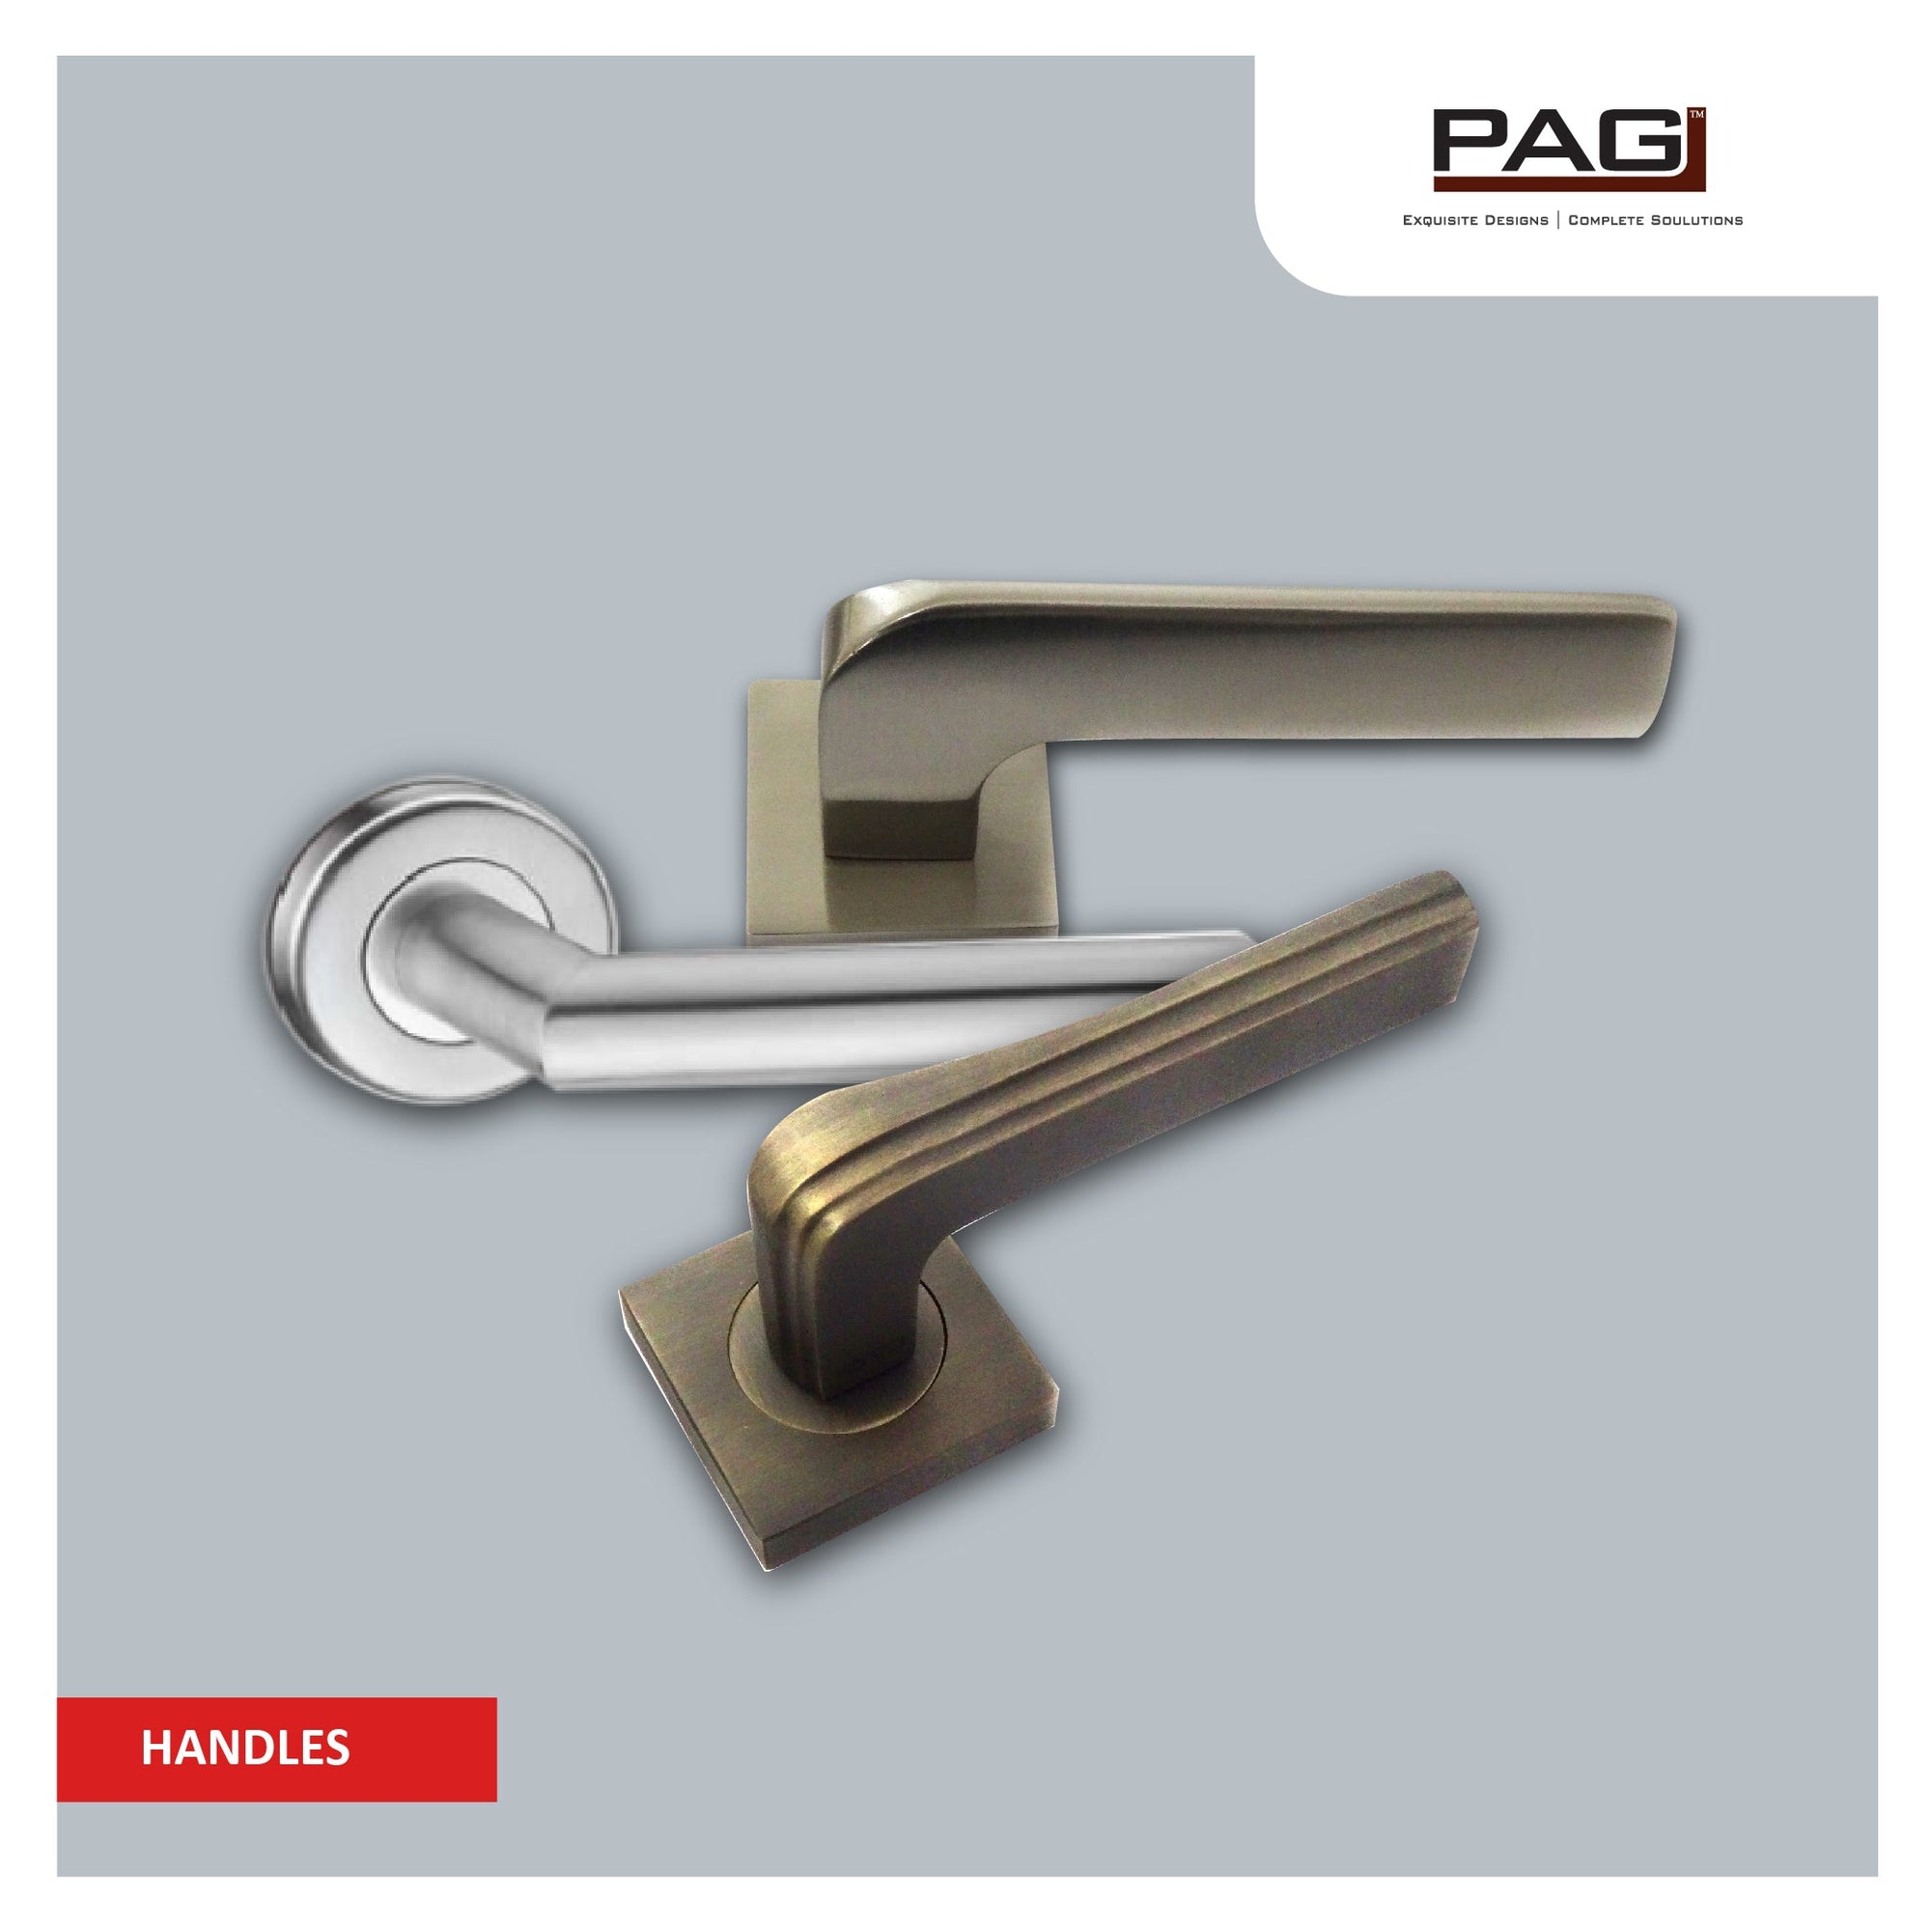 PAG Lever Handles - Enhance your space with stylish and functional lever handles from M. M. Noorbhoy & Co.